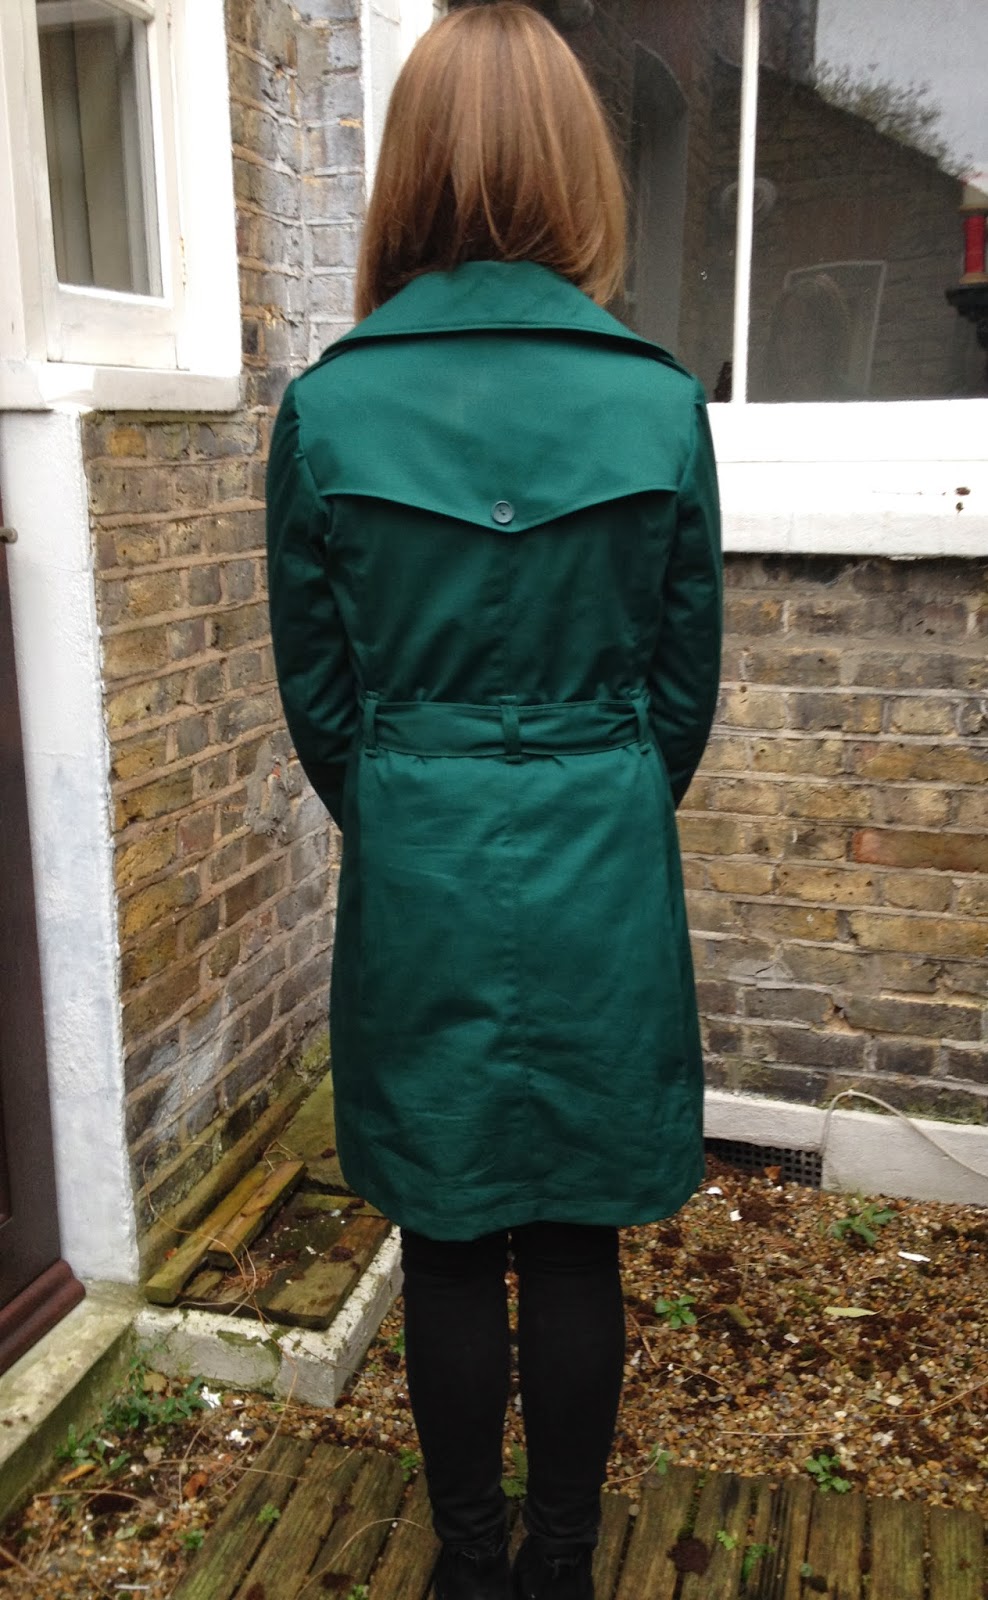 Diary of a Chain Stitcher : My Completed Robson Coat!